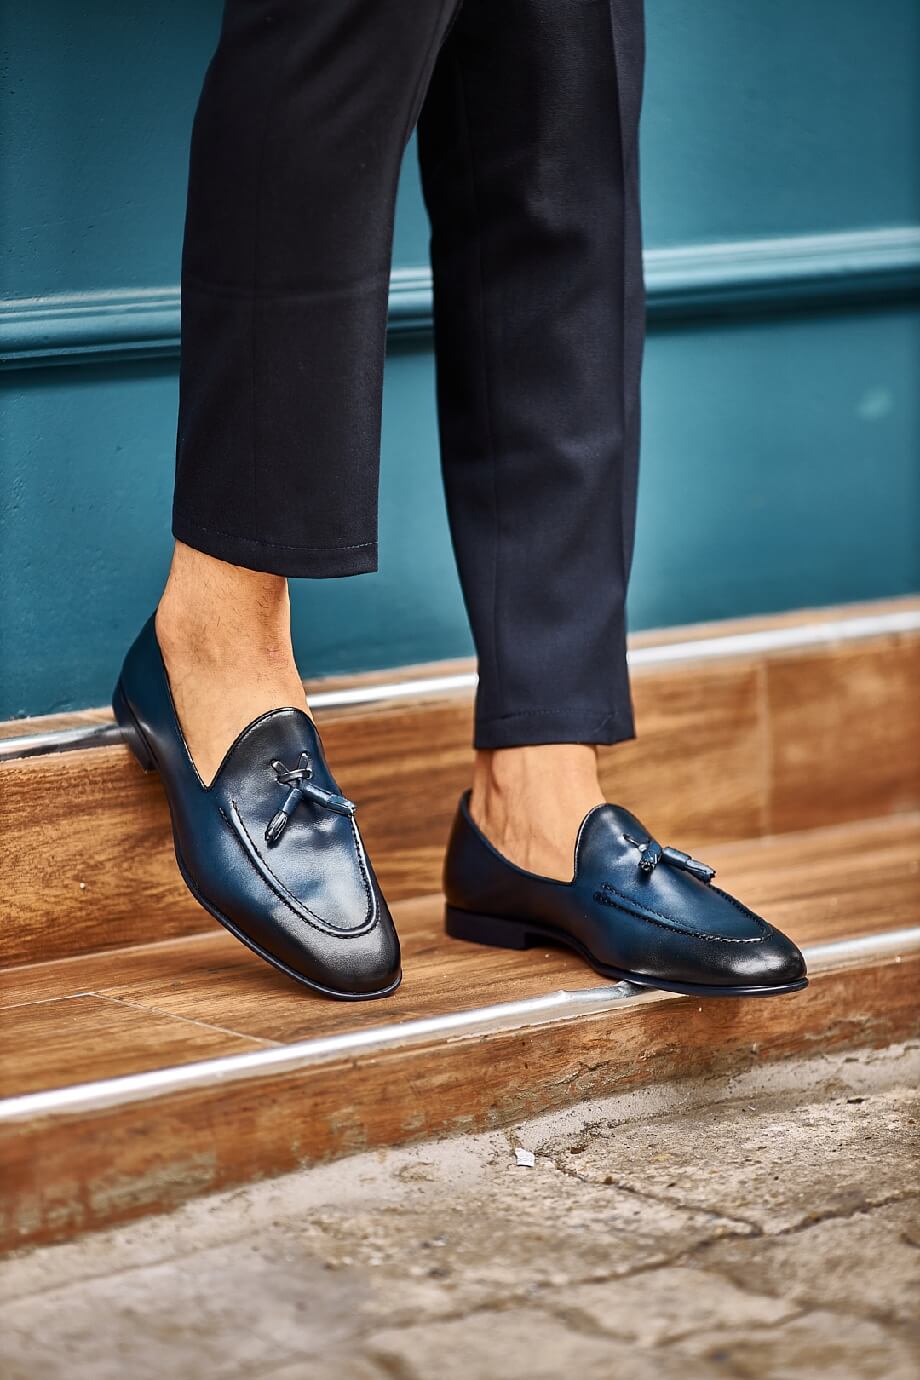 Premium Classic Navy Blue Tassel Loafers crafted from 100% premium leather, featuring elegant tassel detail for casual and formal occasions.